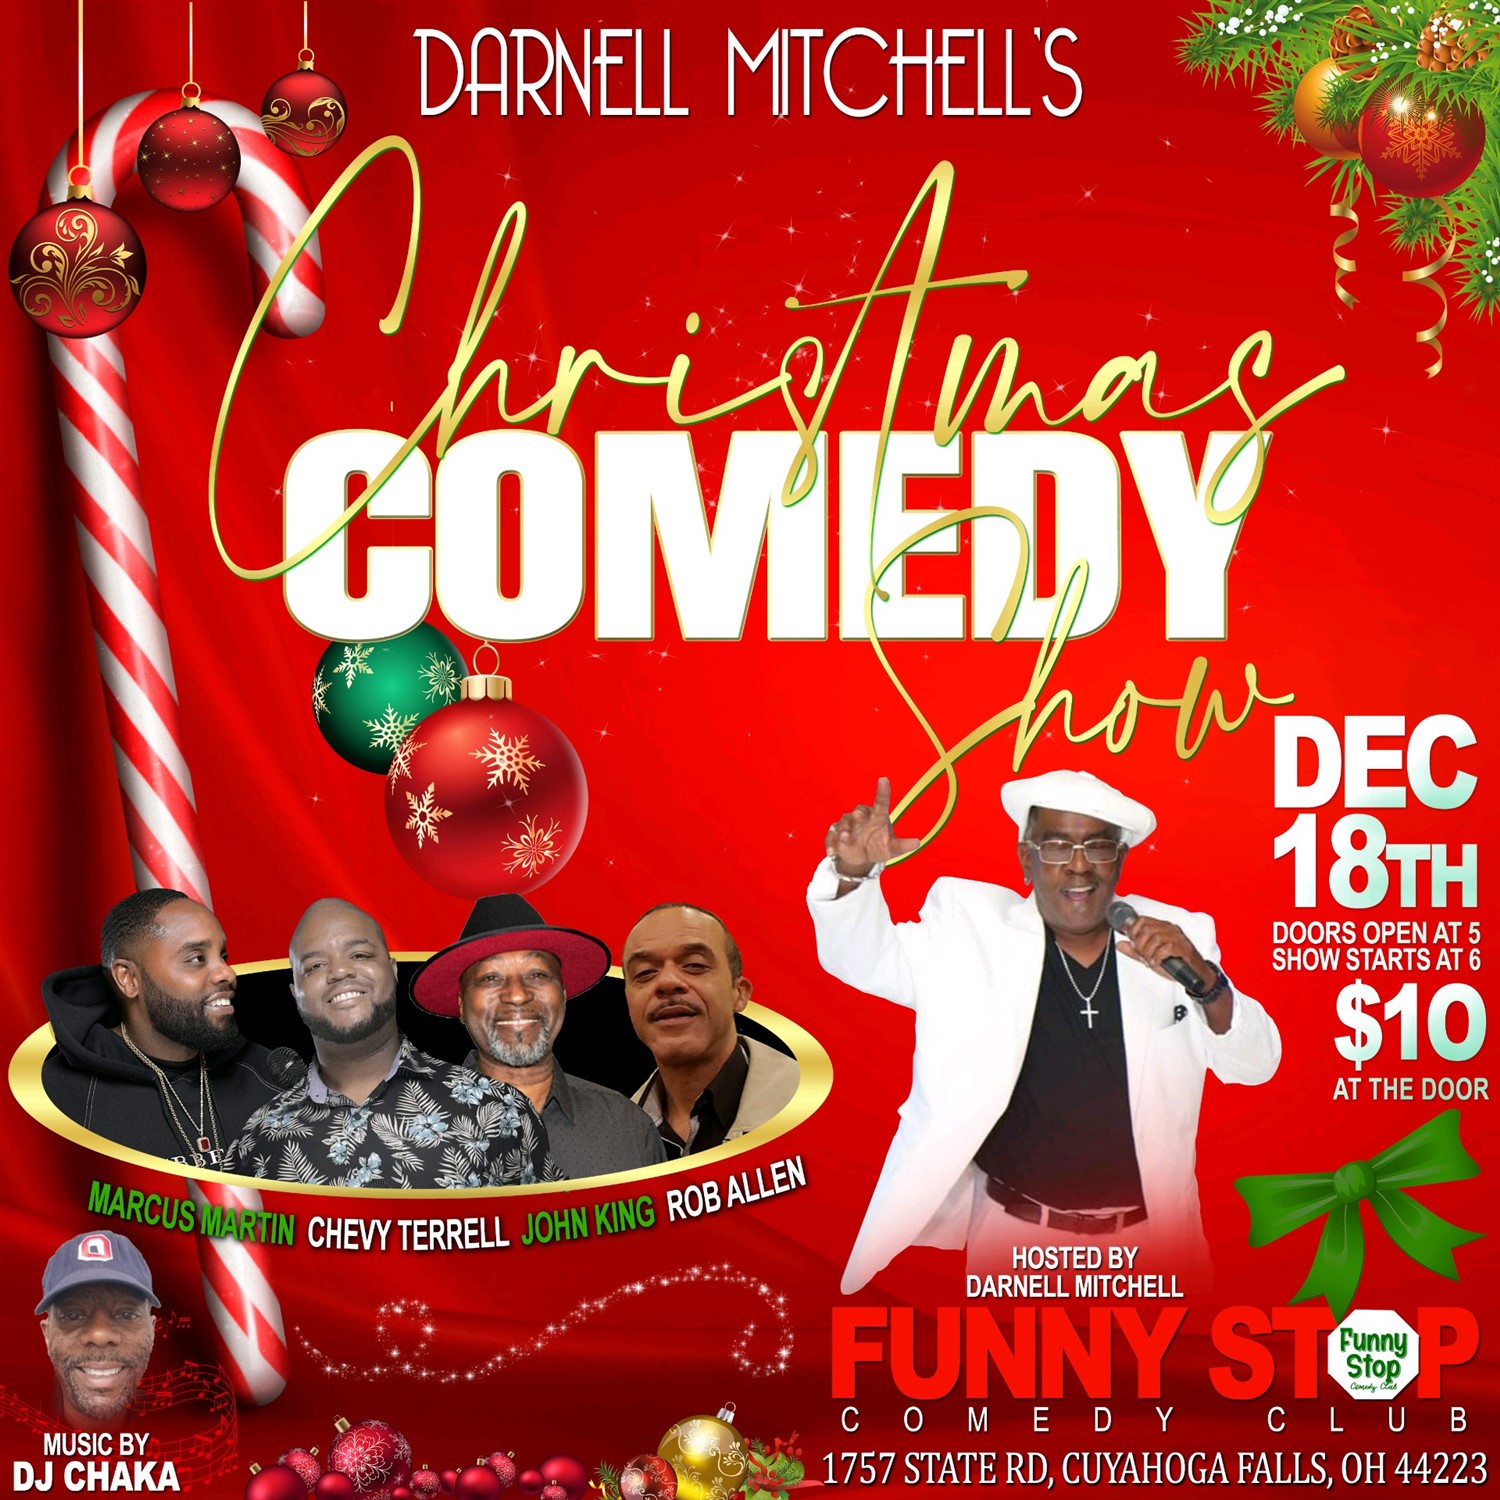 Christmas Comedy Show hosted by Darnell Mitchell featuring Marcus Martin, Chevy Terrell, John King, Rob Allen, and DJ Chaka at Funny Stop Comedy Club on dic. 18, 18:00@Funny Stop Comedy Club - Buy tickets and Get information on Funny Stop funnystop.online